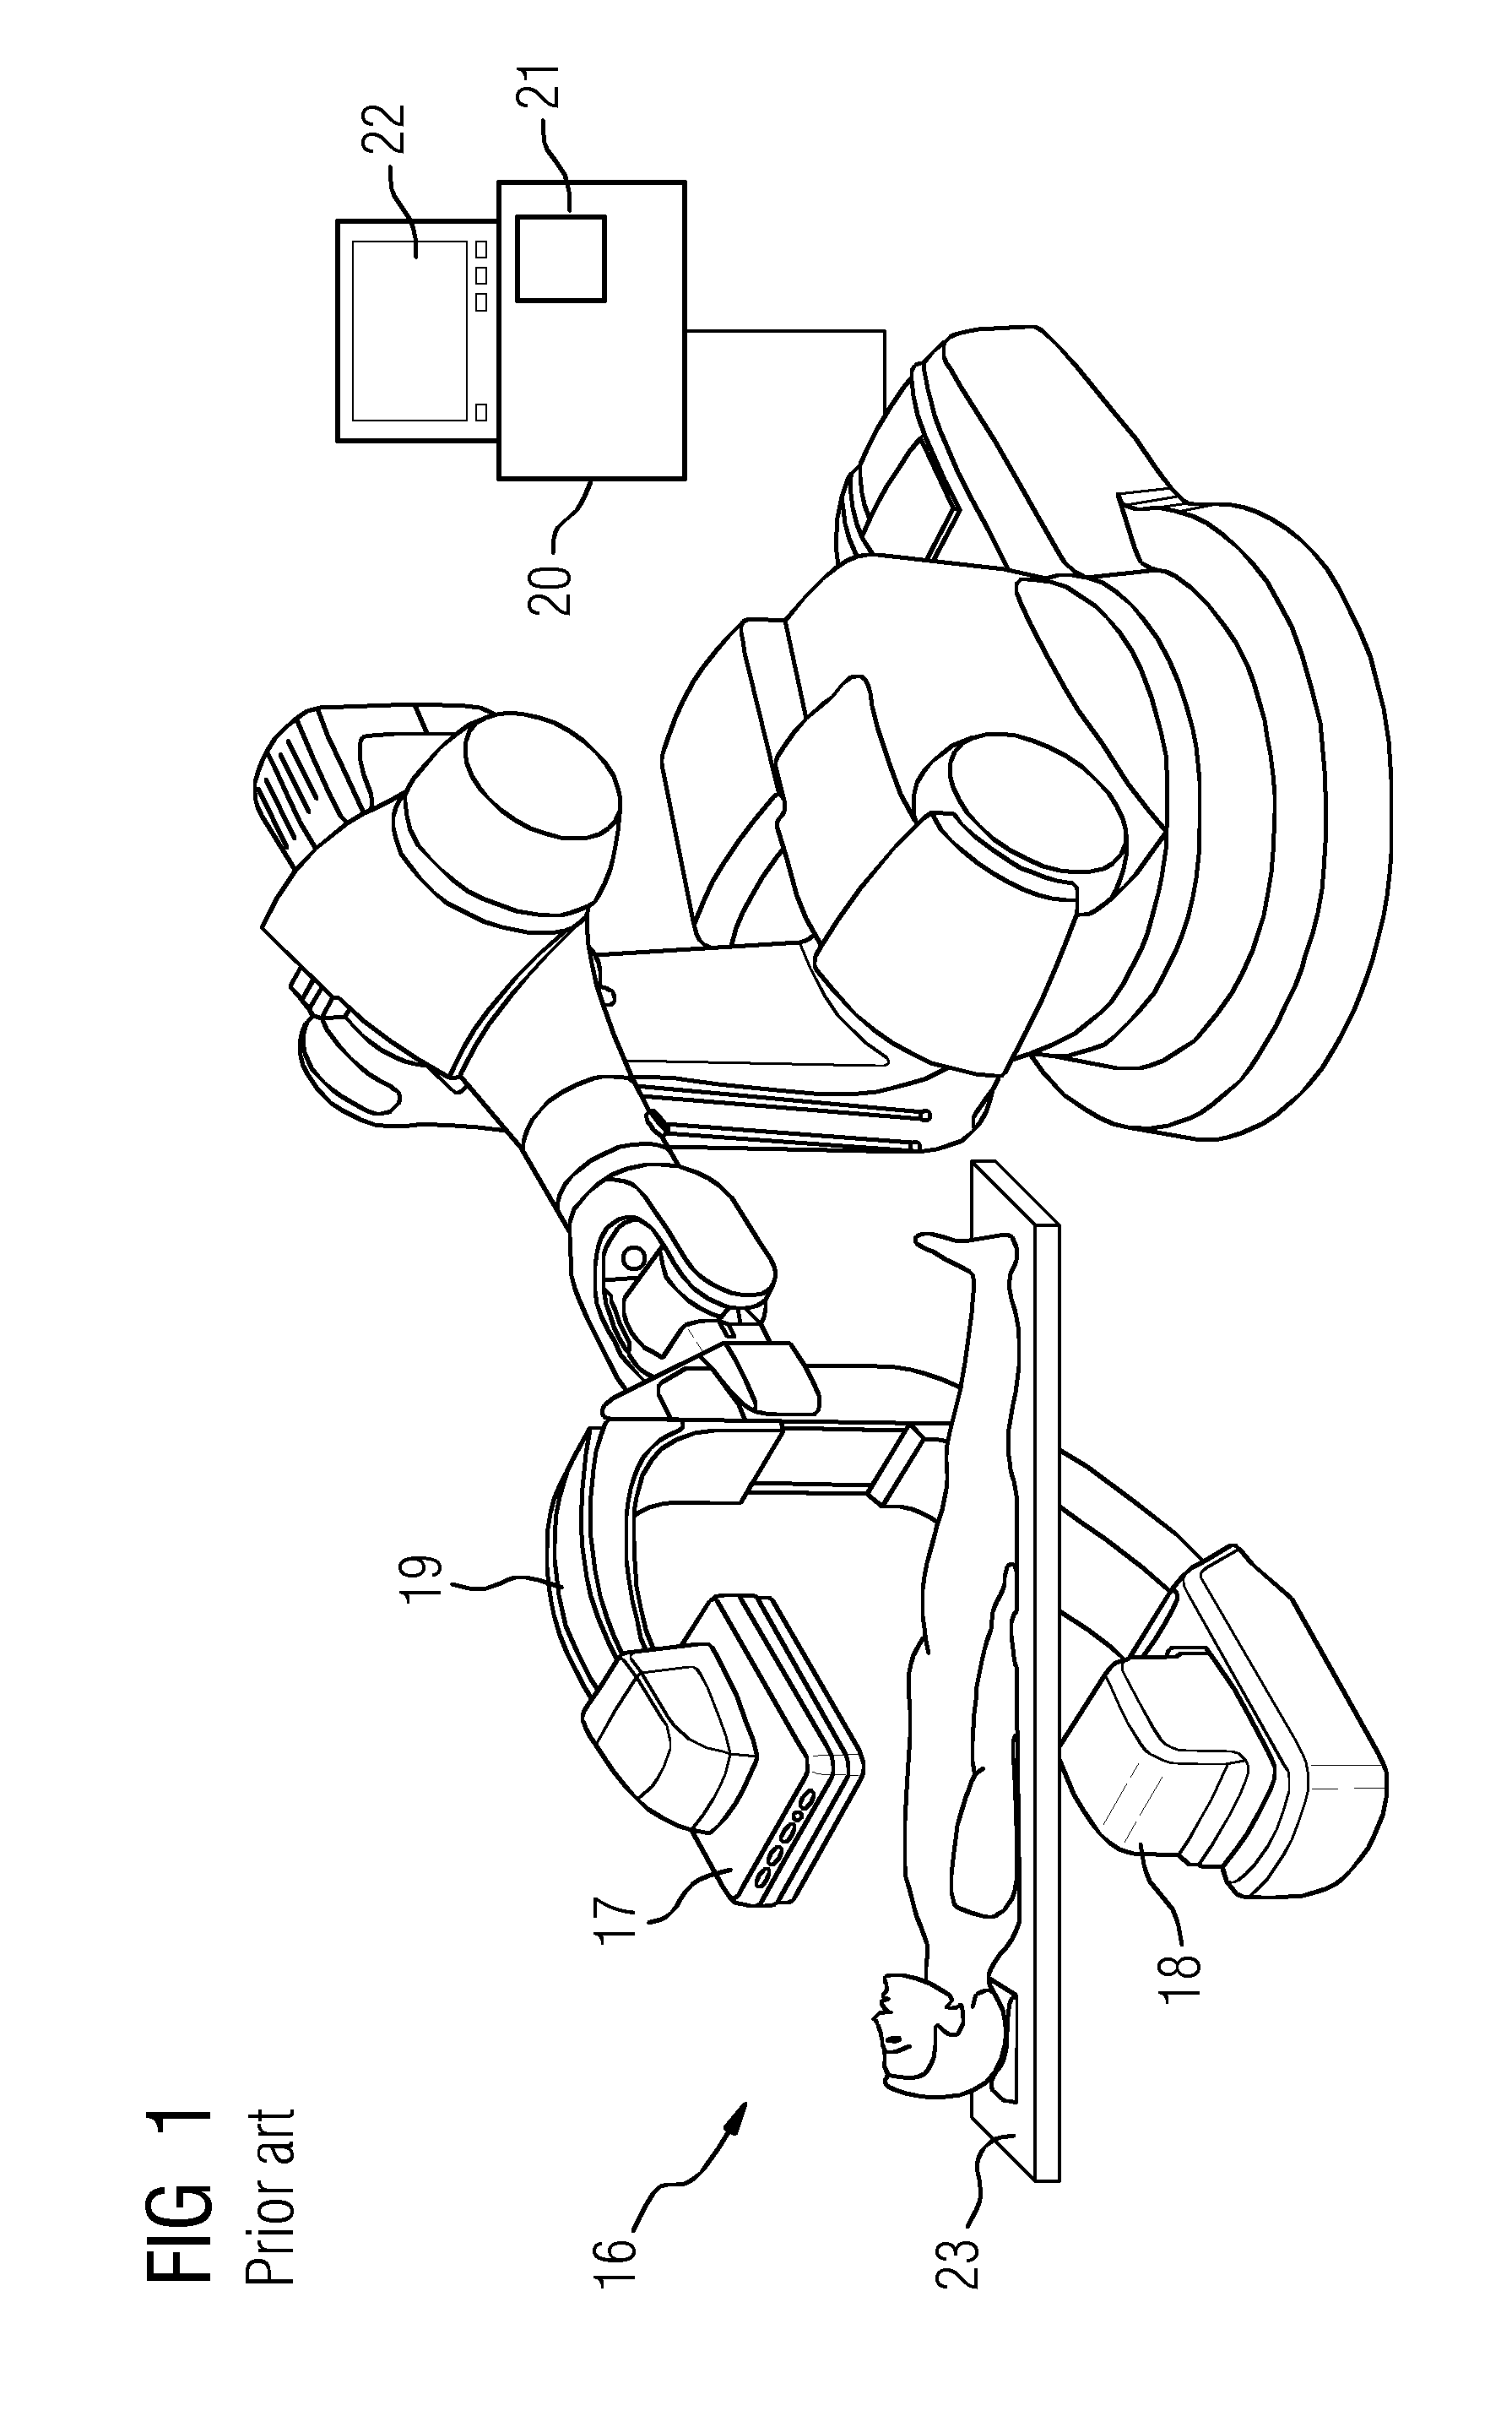 Method for calibrating a counting digital X-ray detector, X-ray system for performing such a method and method for acquiring an X-ray image